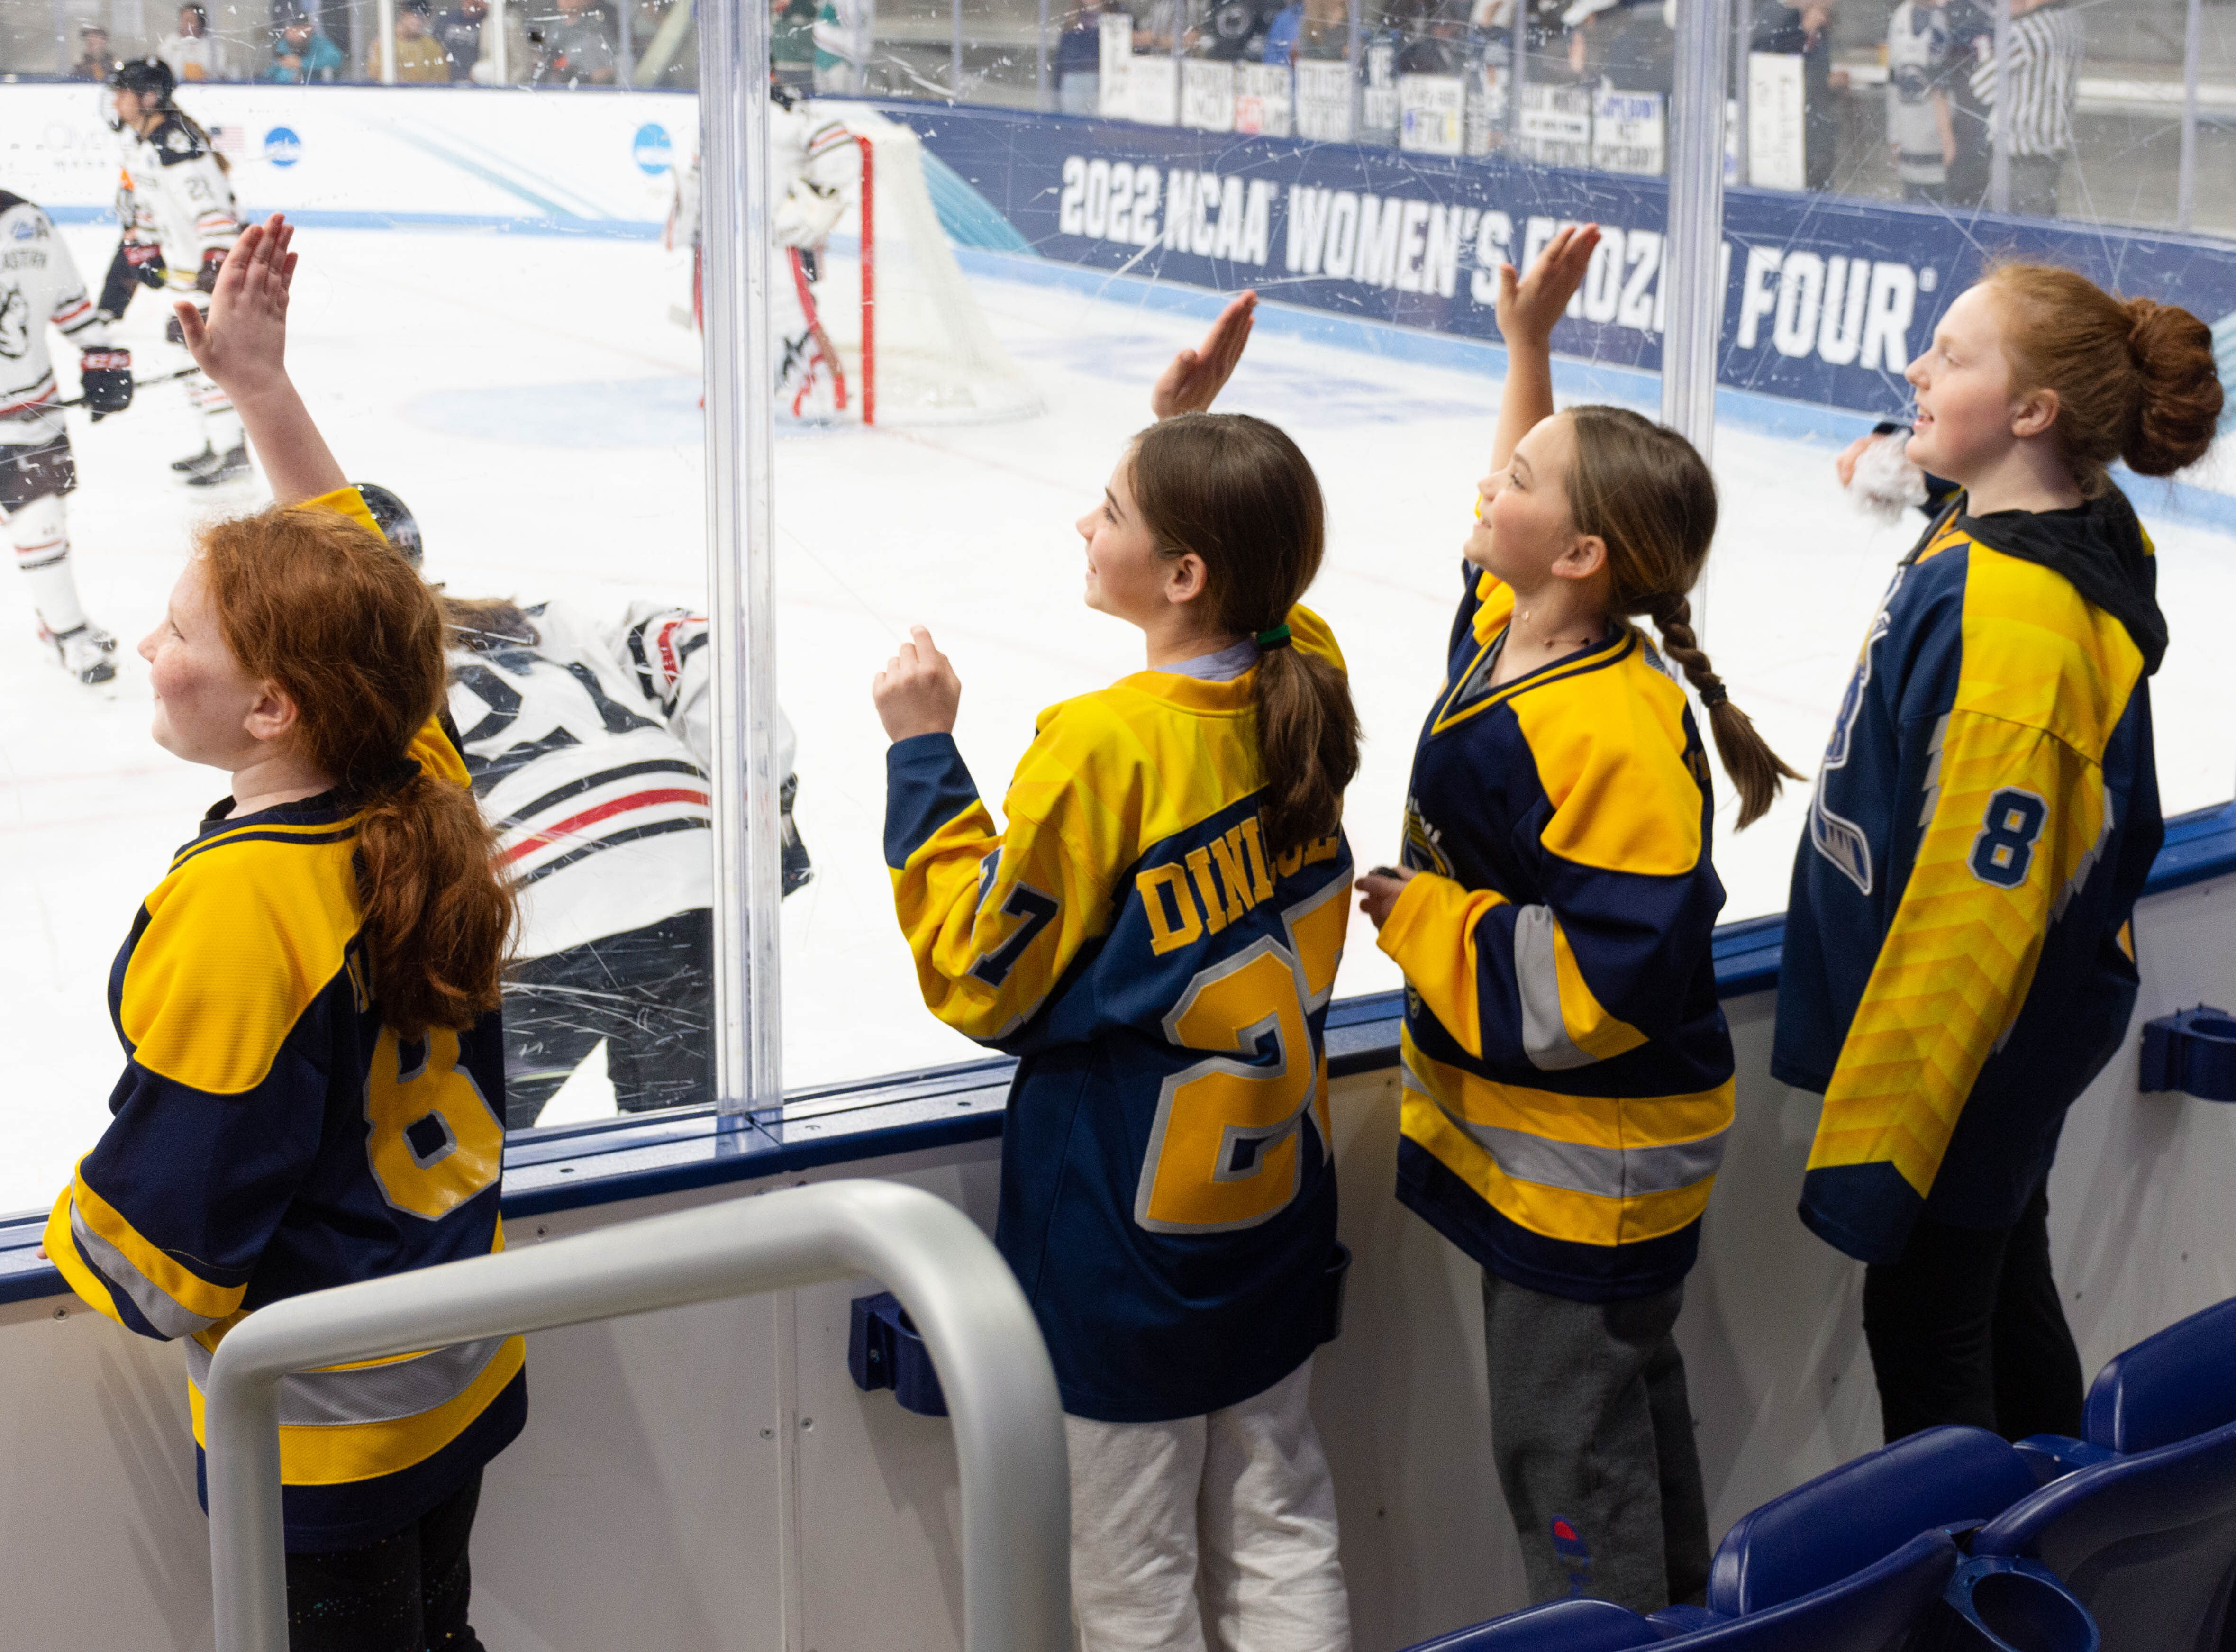 Penn State hosting Womens Frozen Four an important step in professional womens hockey coming to Pennsylvania